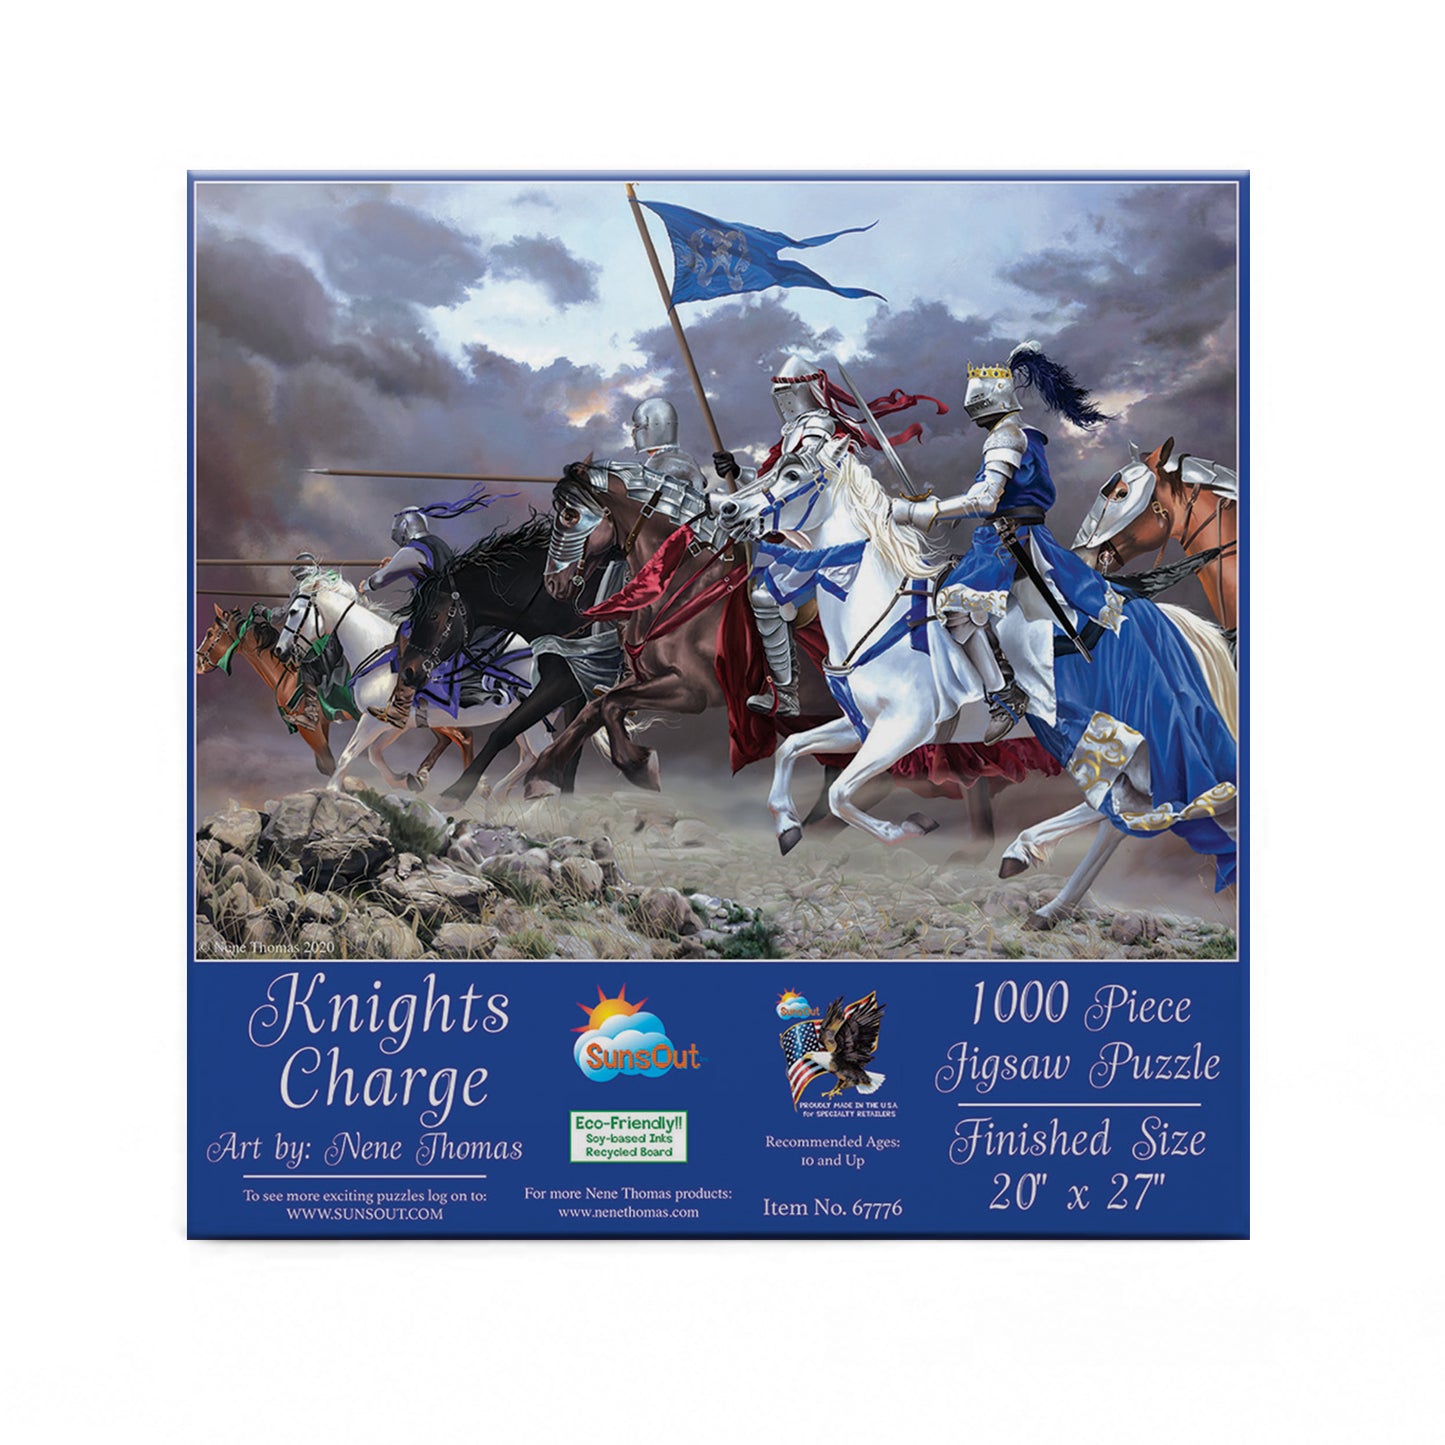 Knights Charge - 1000 Piece Jigsaw Puzzle